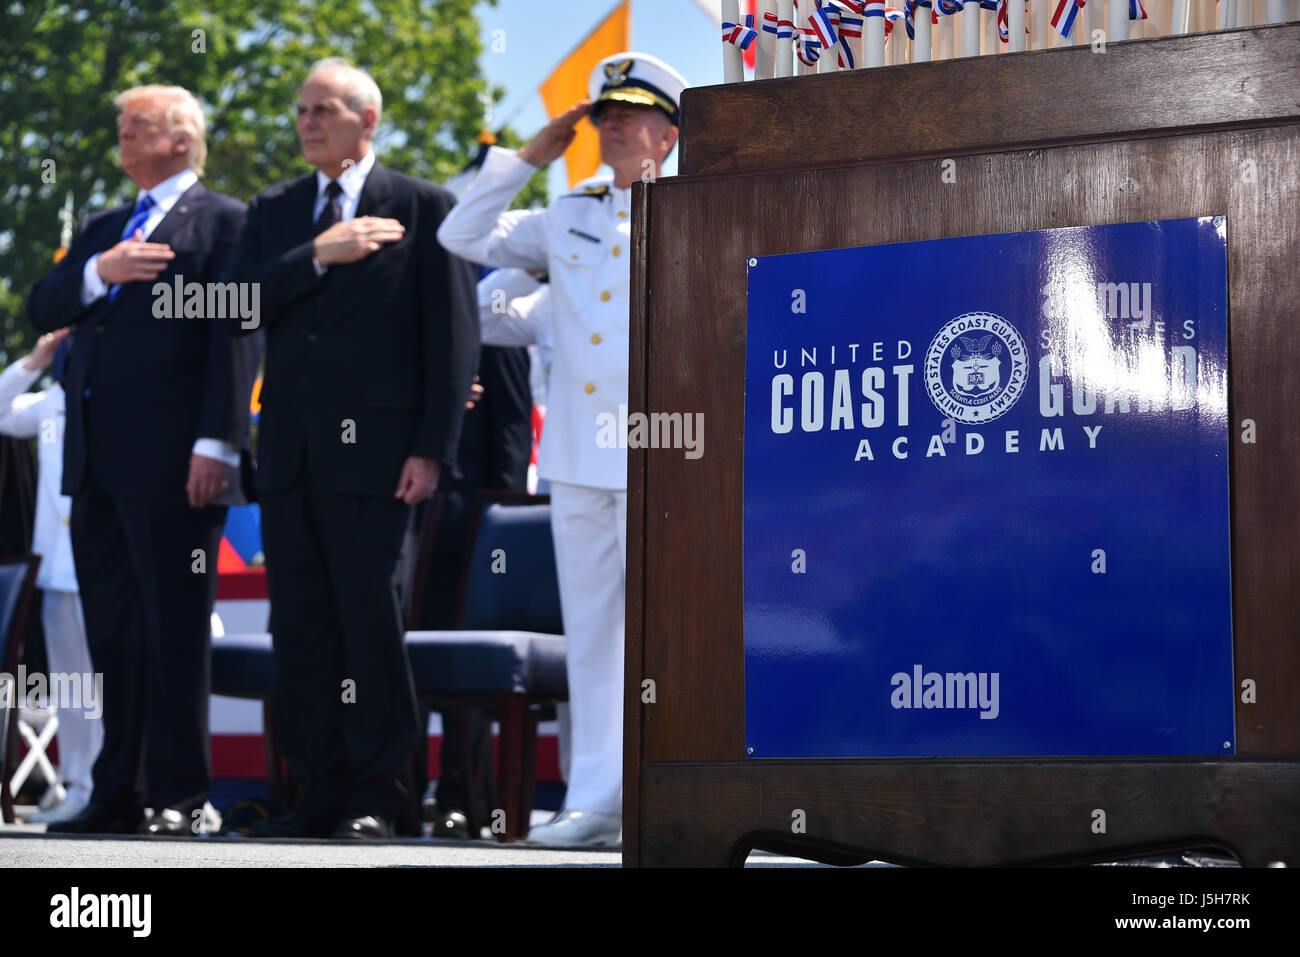 New London, USA. 17th May, 2017. U.S. President Donald Trump, Homeland Security Secretary John Kelly, center, and Coast Guard Commandant Adm. Paul Zukunft salutes during the national anthem at the 136th Coast Guard Academy commencement ceremony May 17, 2017 in New London, Connecticut. Credit: Planetpix/Alamy Live News Stock Photo